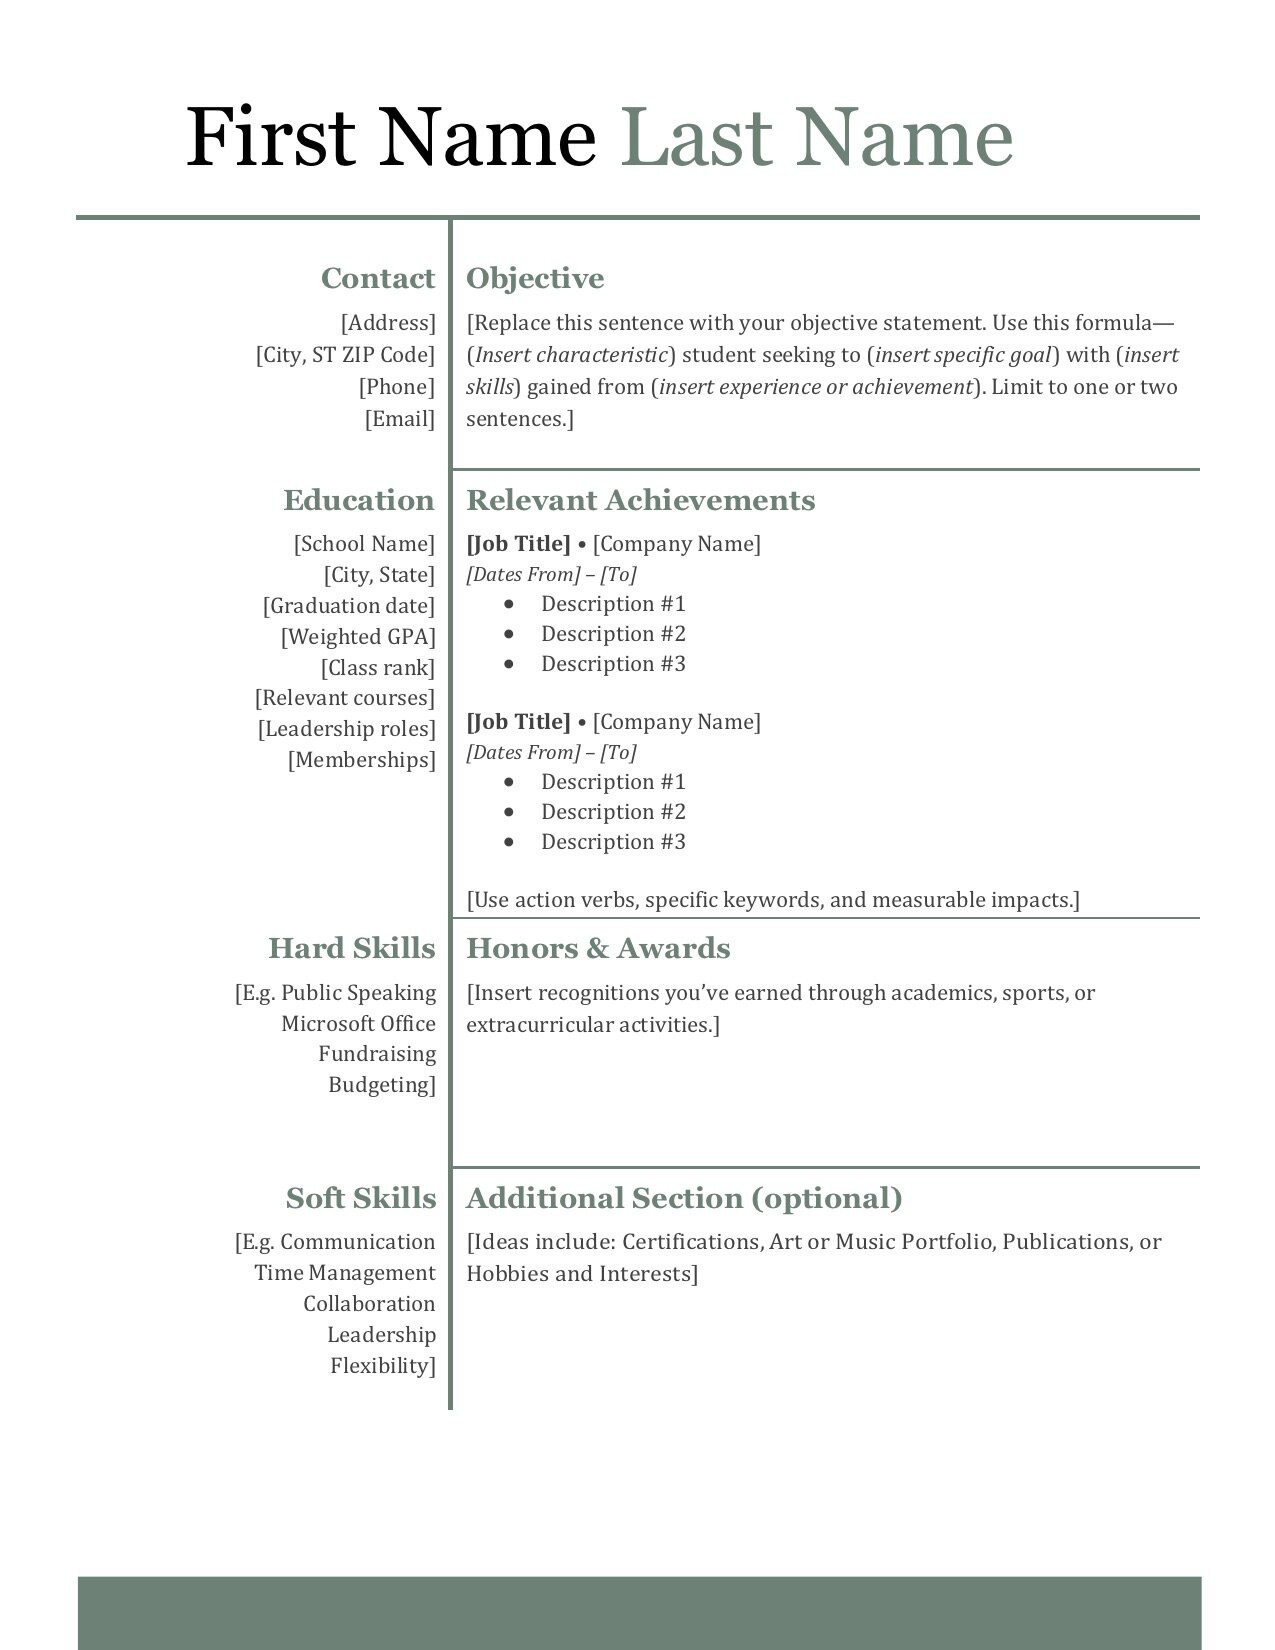 Sample High School Resume for College Application How to Write An Impressive High School Resume â Shemmassian …